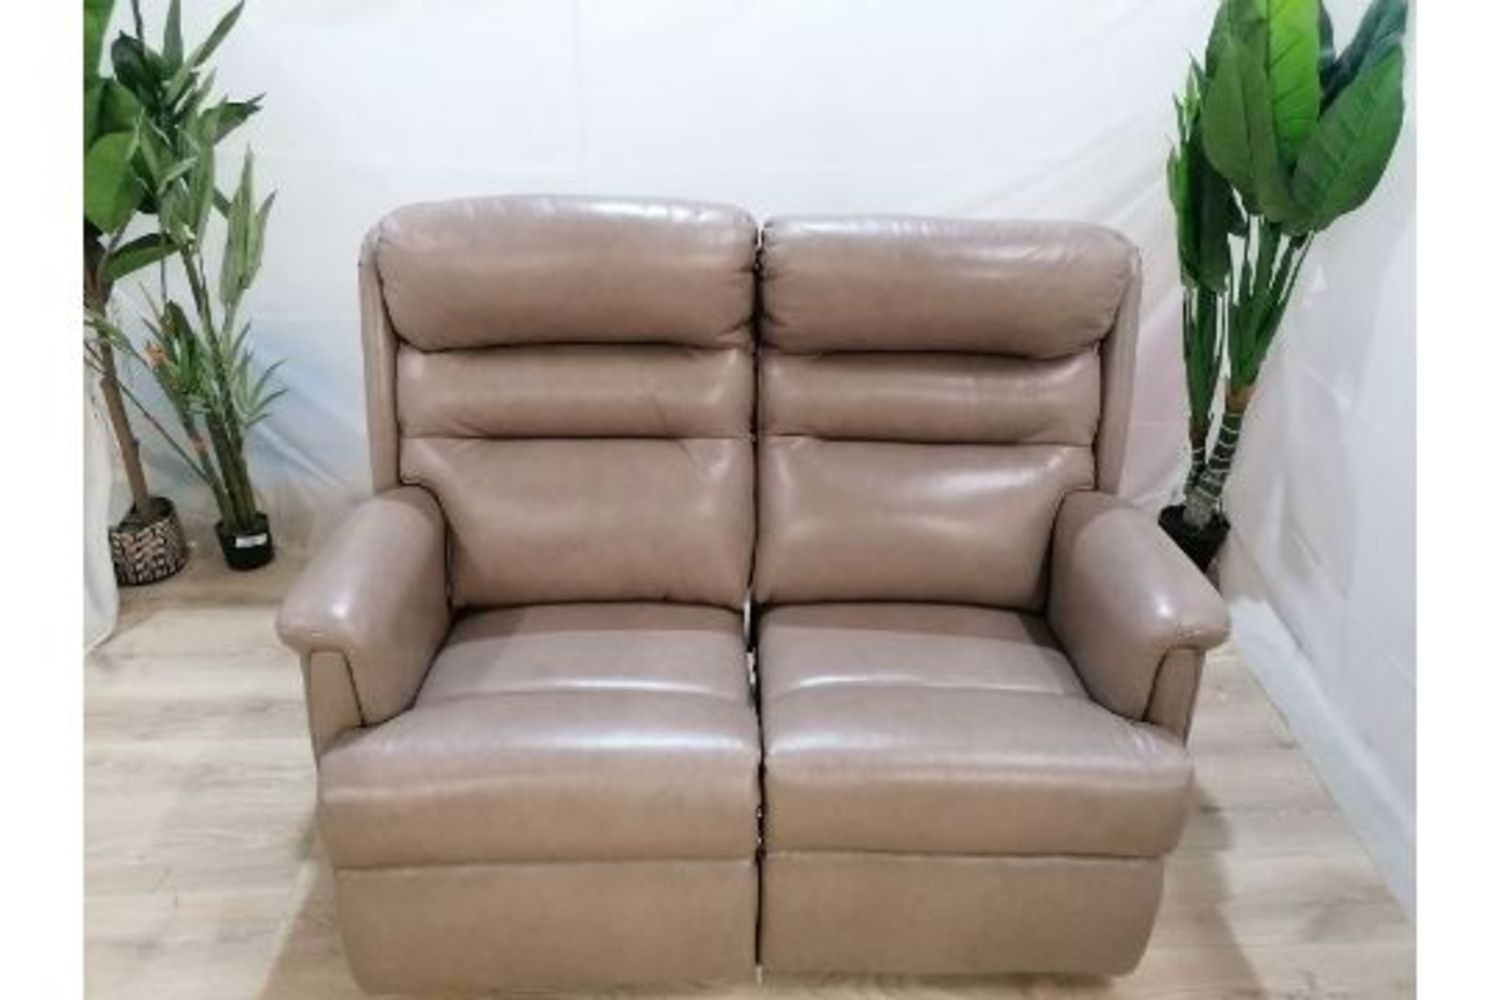 New Lots added, Sofas and Armchairs from Costco, Swoon, and more